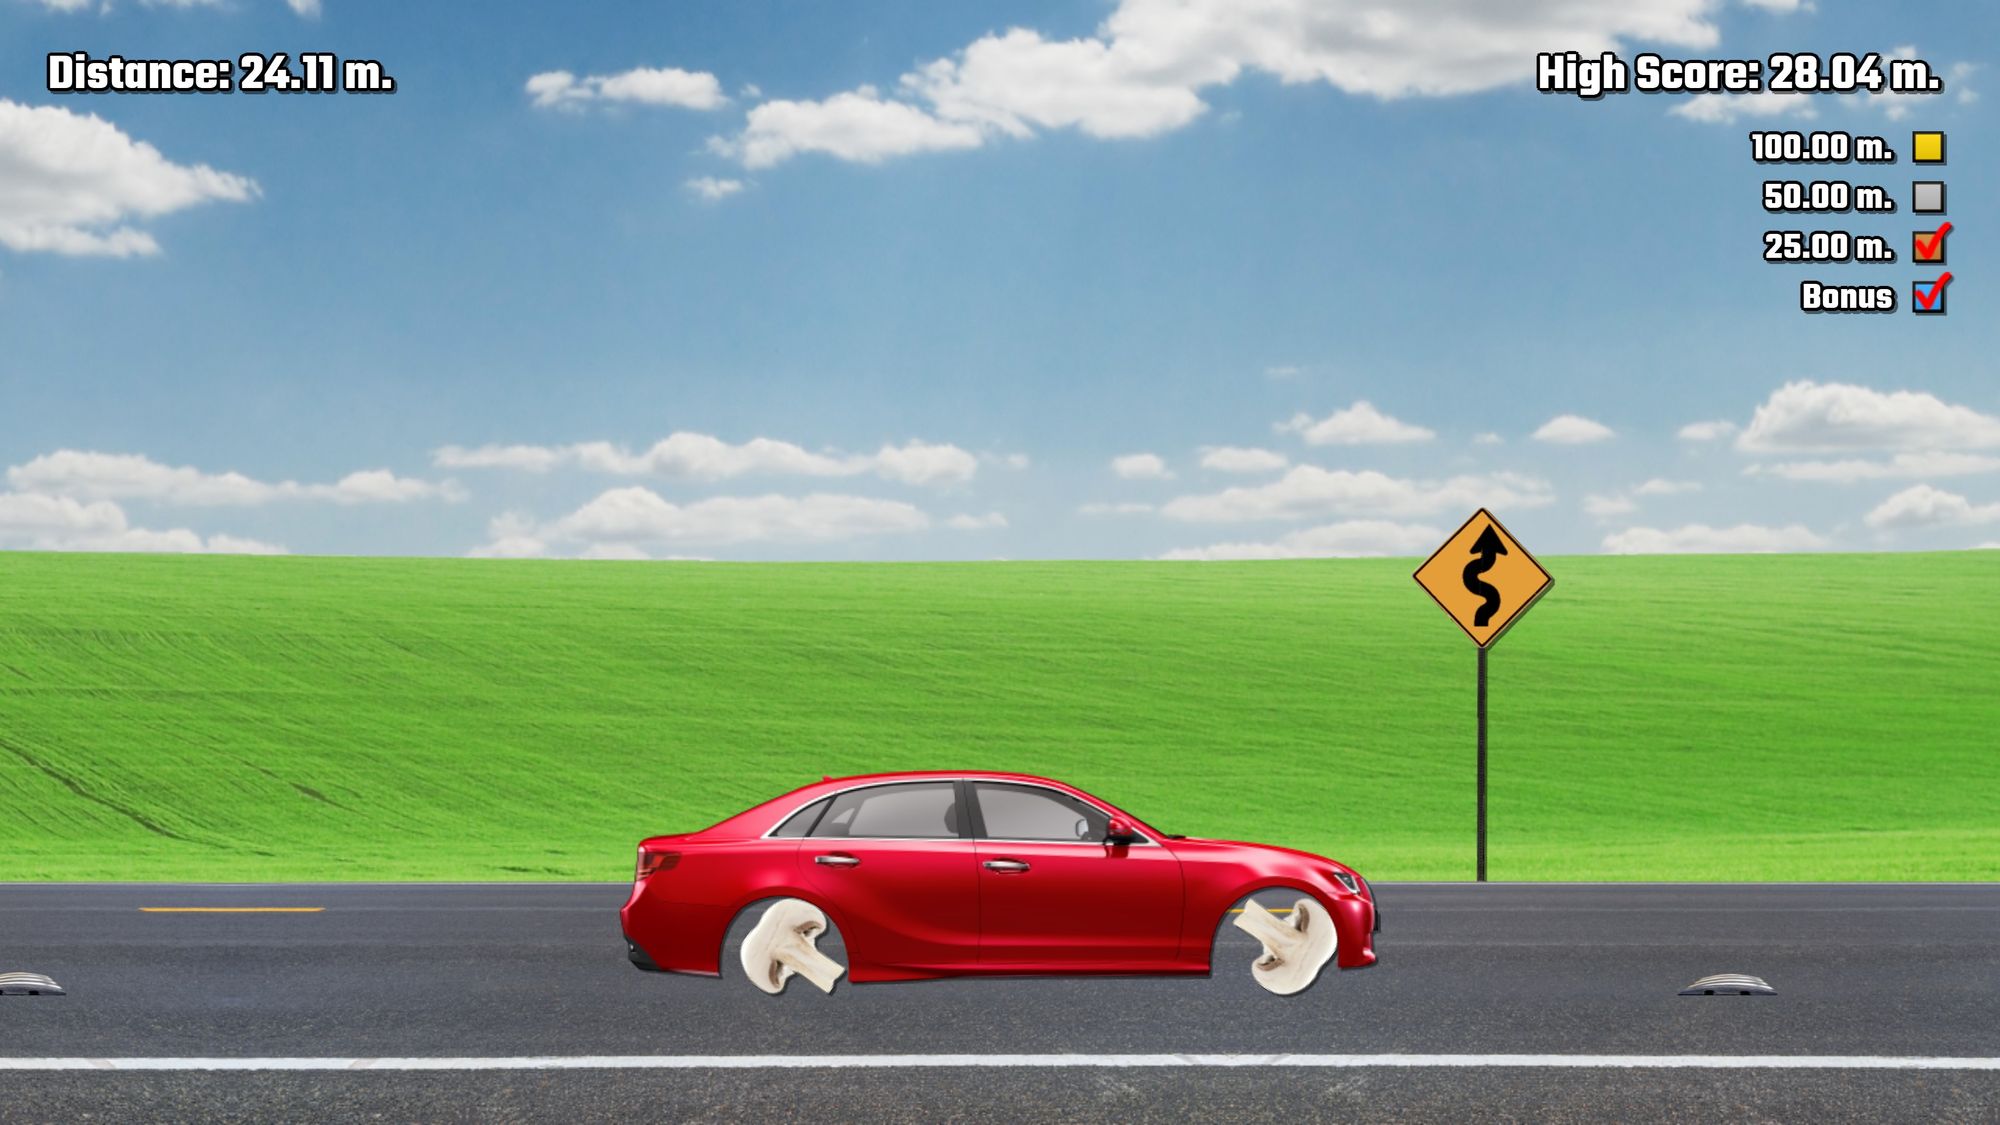 A clipart scene of a red sedan with sliced mushrooms for wheels.